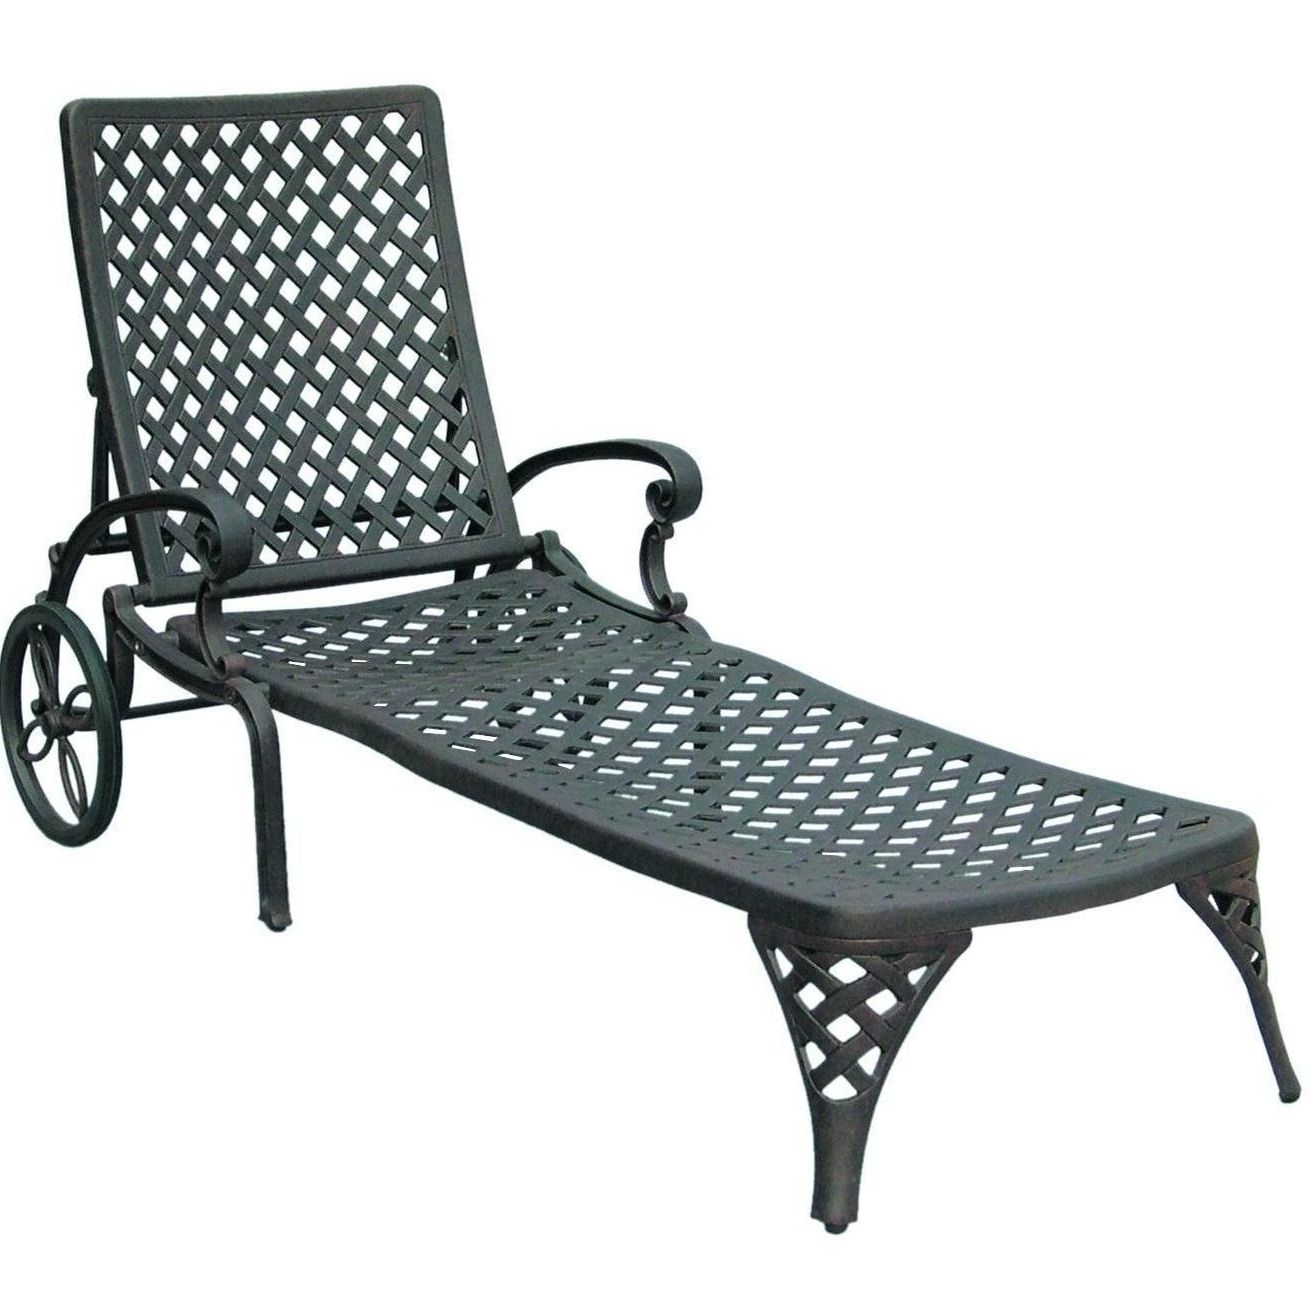 2018 Darlee Nassau Cast Aluminum Patio Chaise Lounge : Ultimate Patio Intended For Outdoor Cast Aluminum Chaise Lounge Chairs (View 1 of 15)